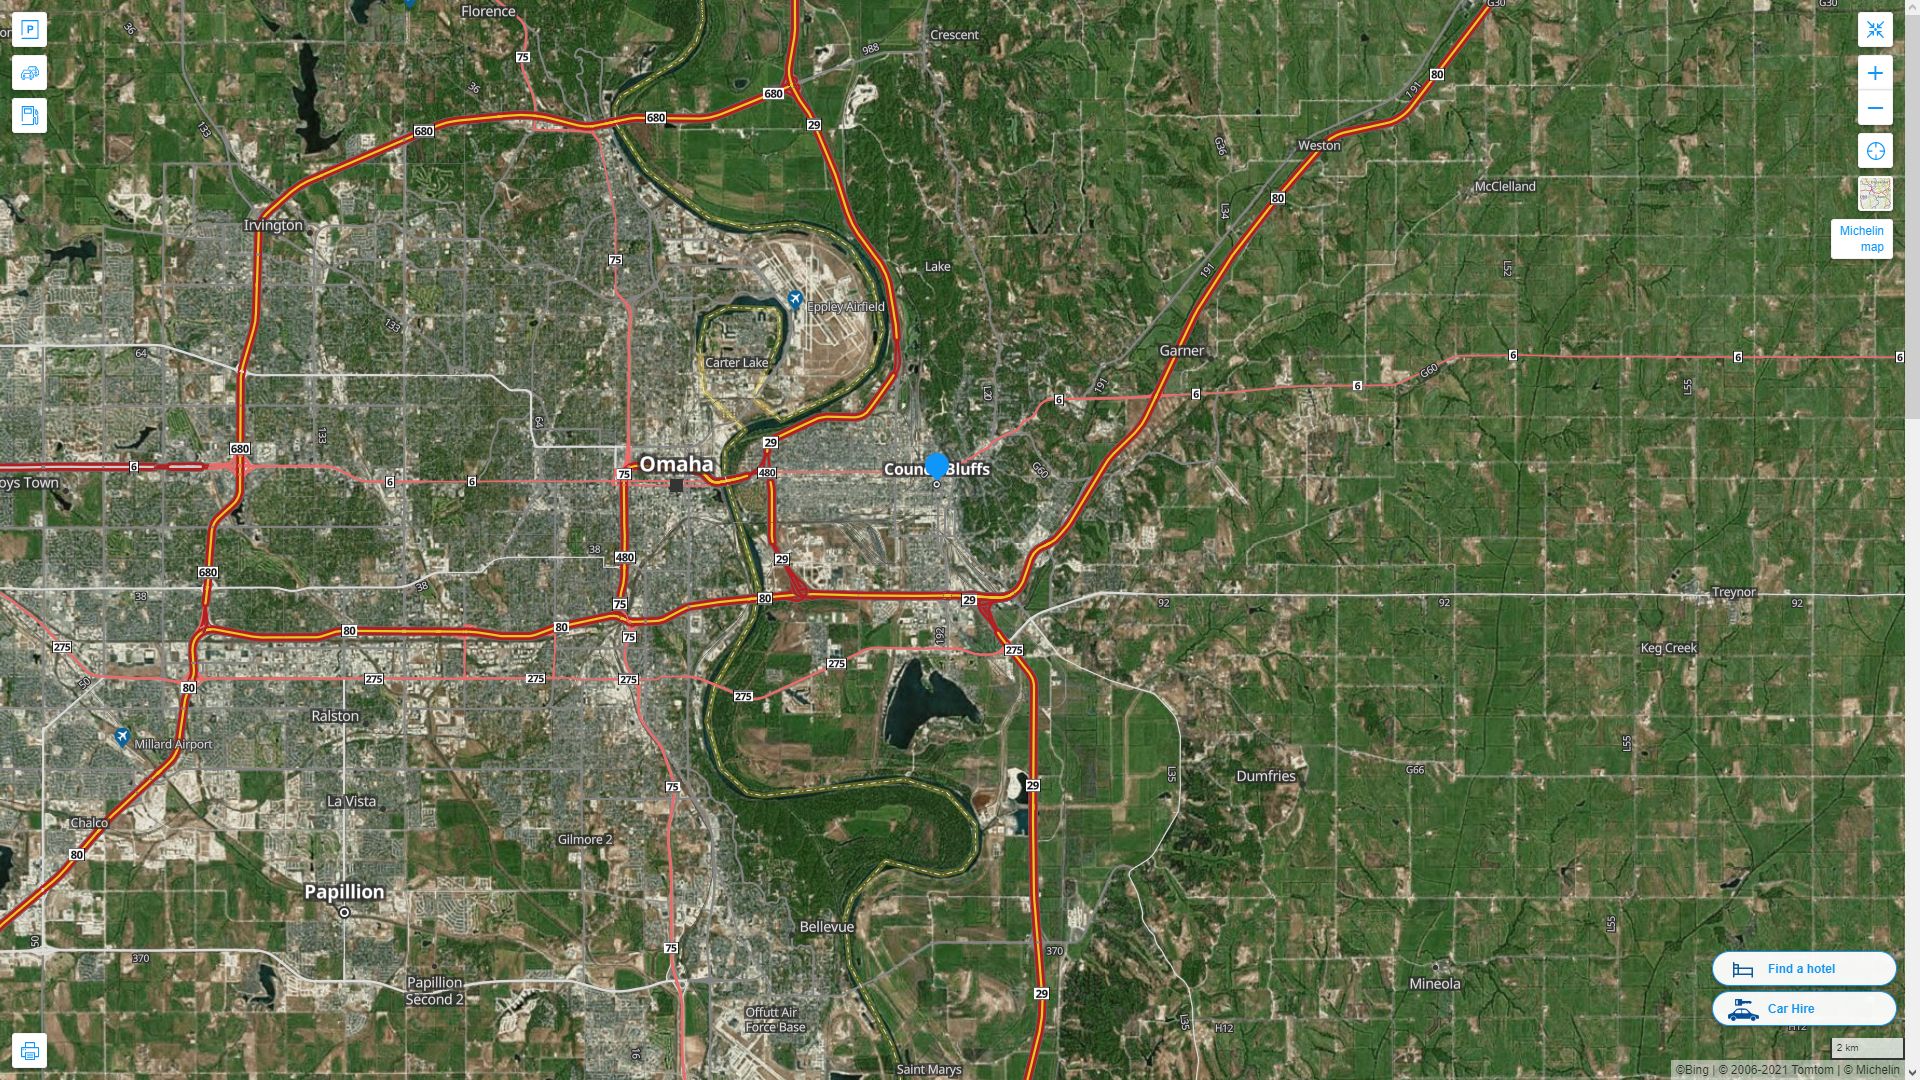 Council Bluffs iowa Highway and Road Map with Satellite View